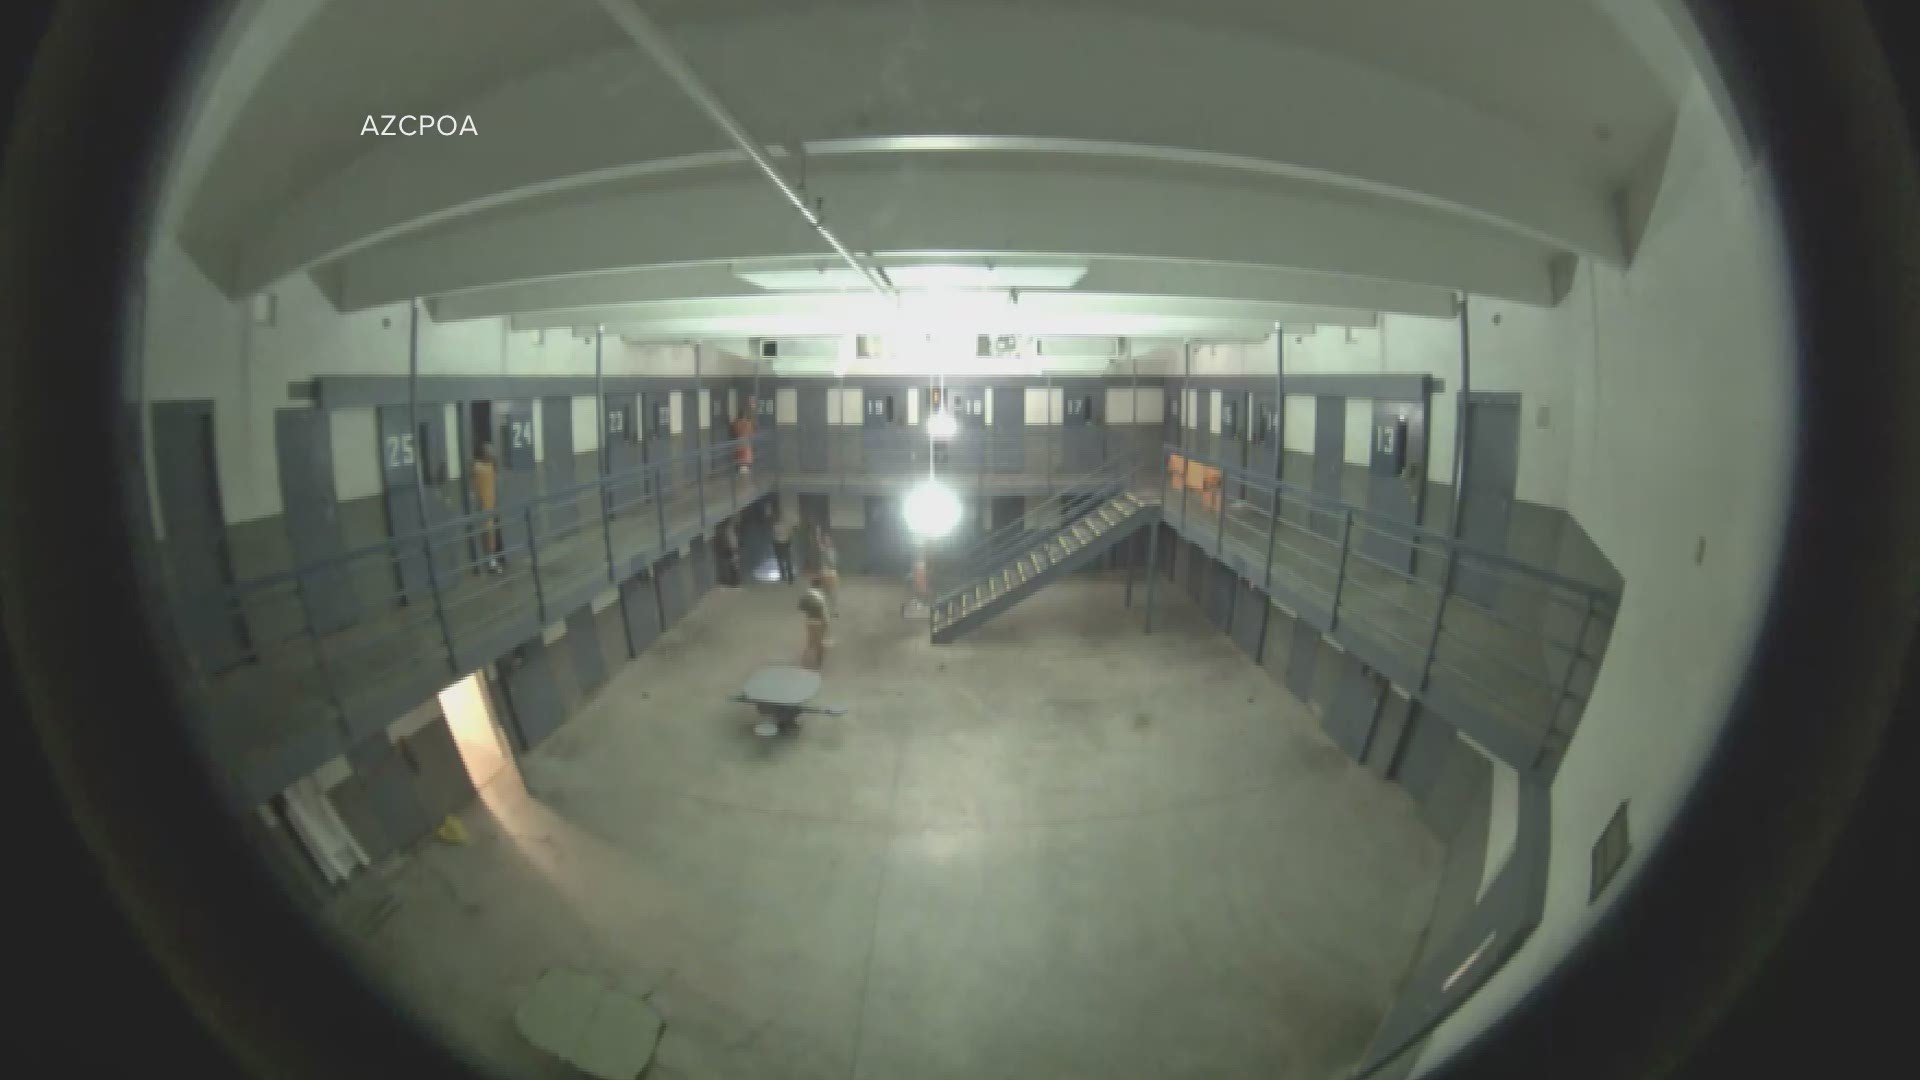 In surveillance video released by AZCPOA, an inmate can be seen slamming an officer into a wall. When a second officer attempts to intervene a second inmate begins attacking officers.